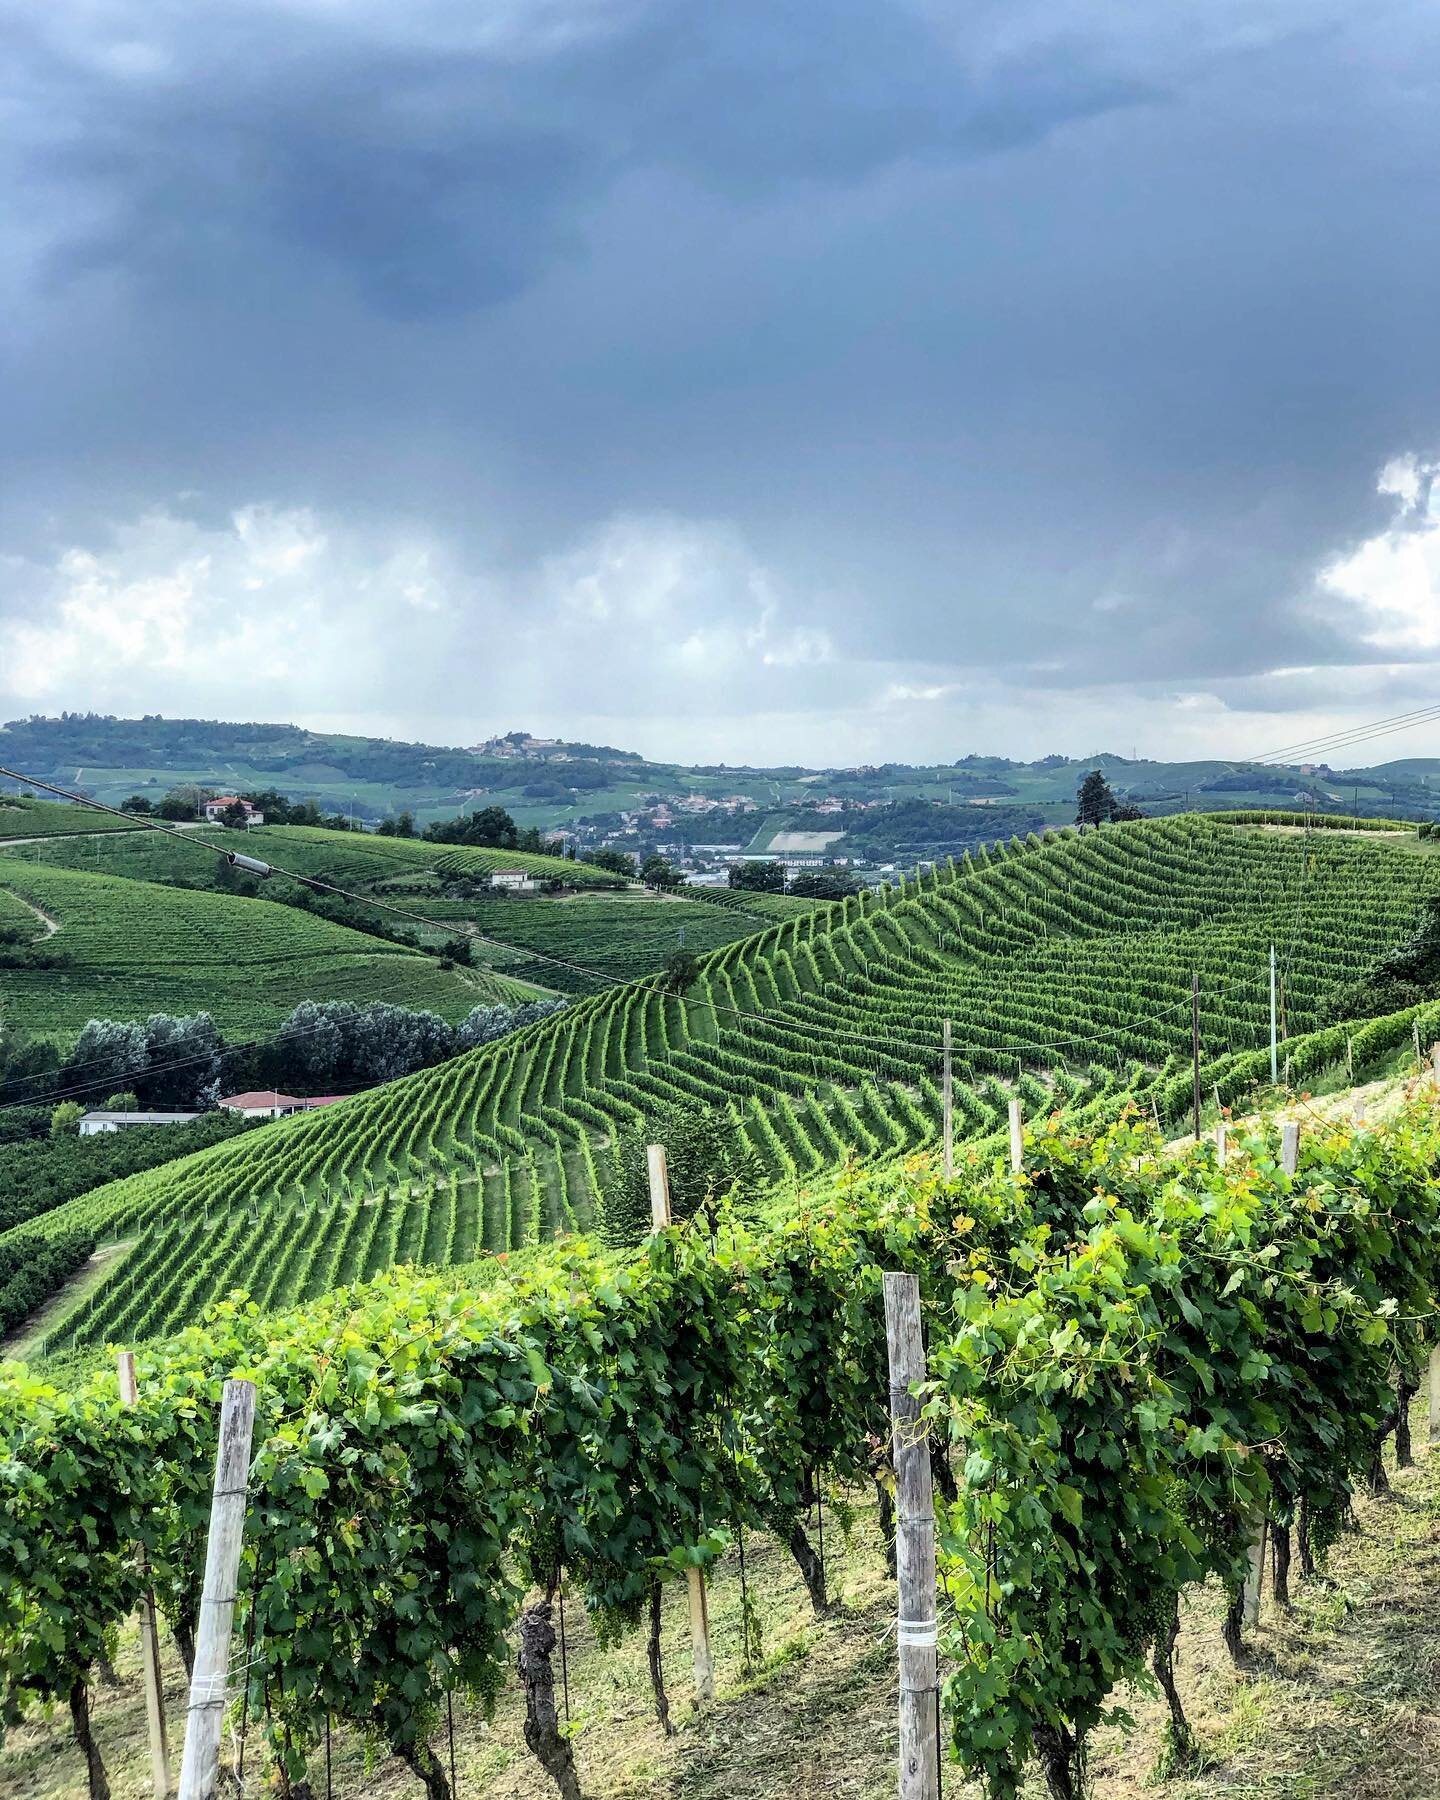 The Santo Stefano vineyard of Neive seen off in the distance underneath imposing dark thunderstorm clouds.  This is the vineyard that Bruno Giacosa used for his famous Riserva etichetta rossa, red label, in the Barbaresco region of Piedmont, Italy.  